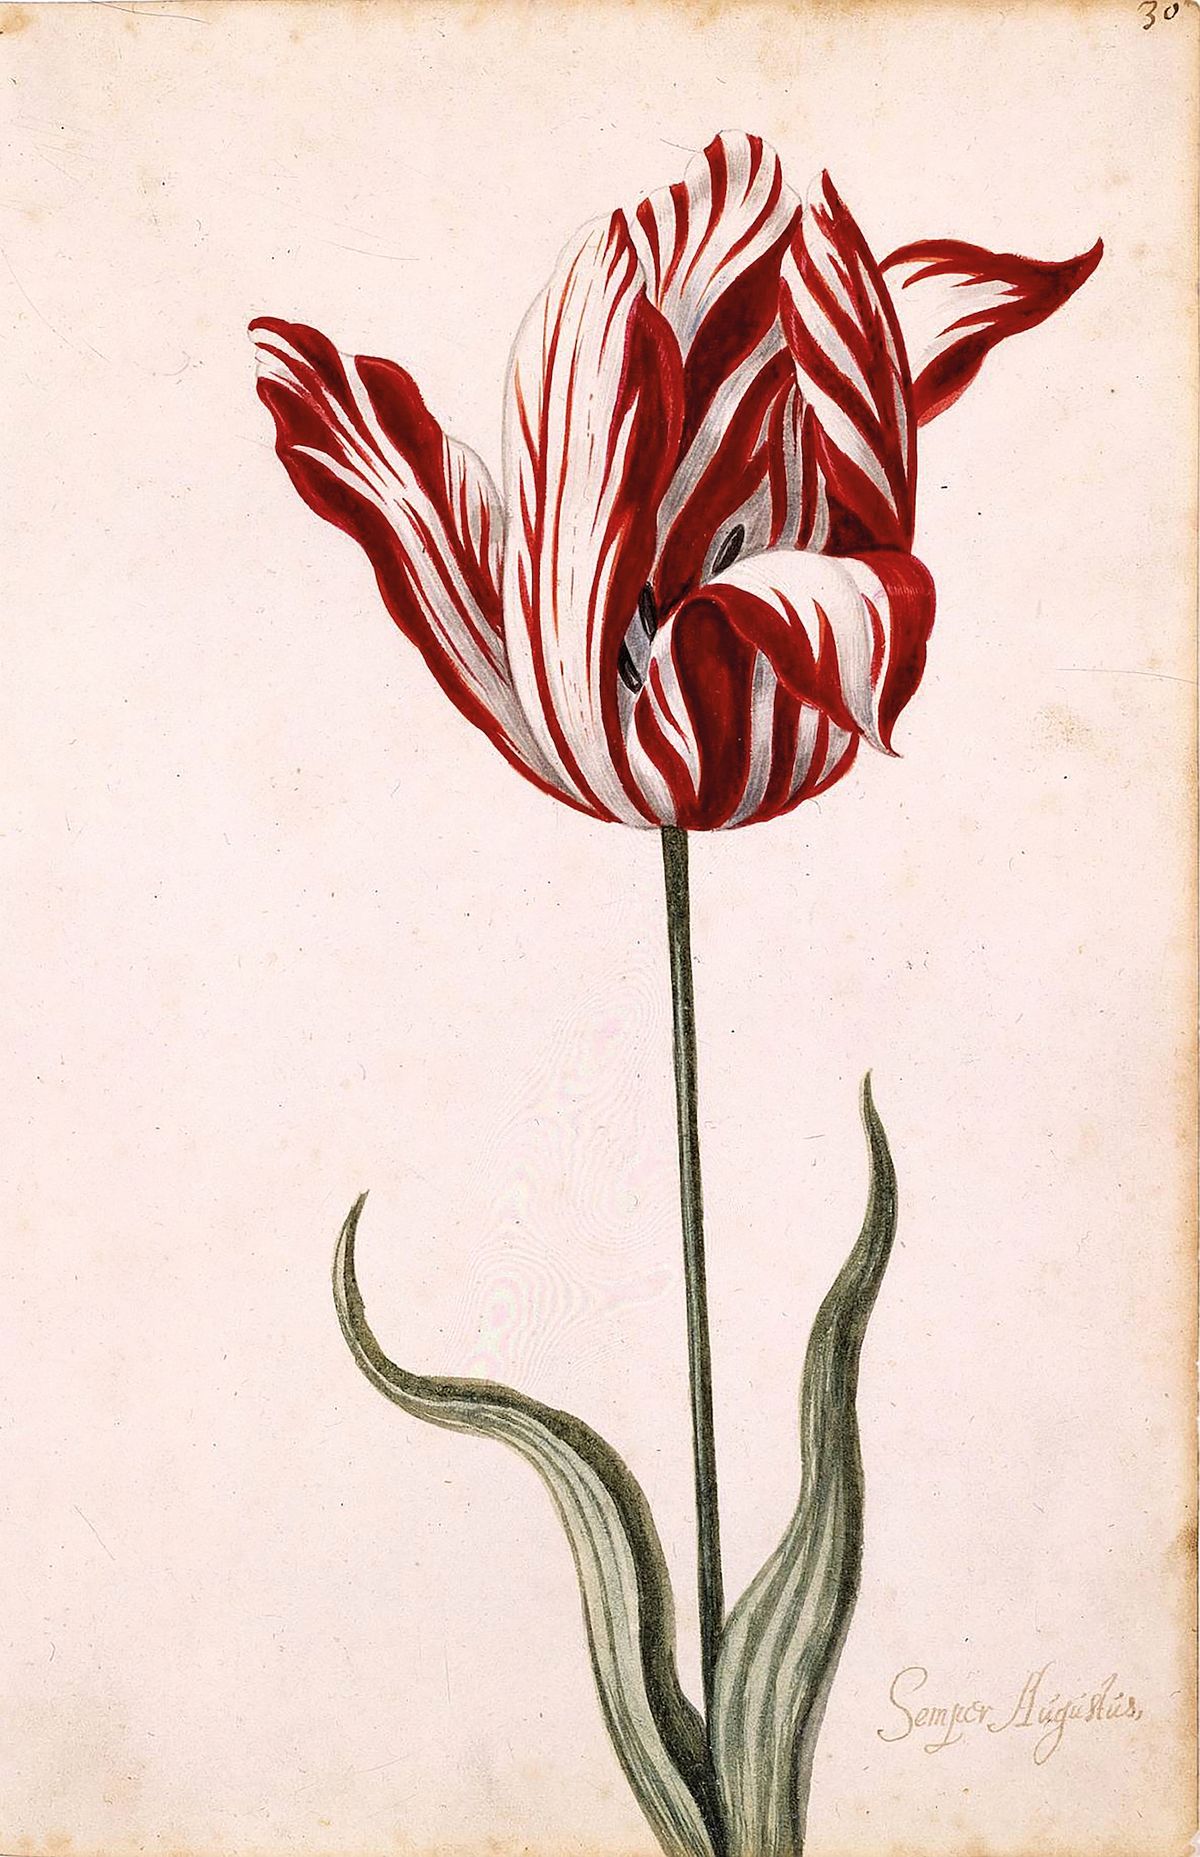 At tulipmania’s peak in 17th-century Holland, specimens cost the same as a mansion Norton Simon Art Foundation